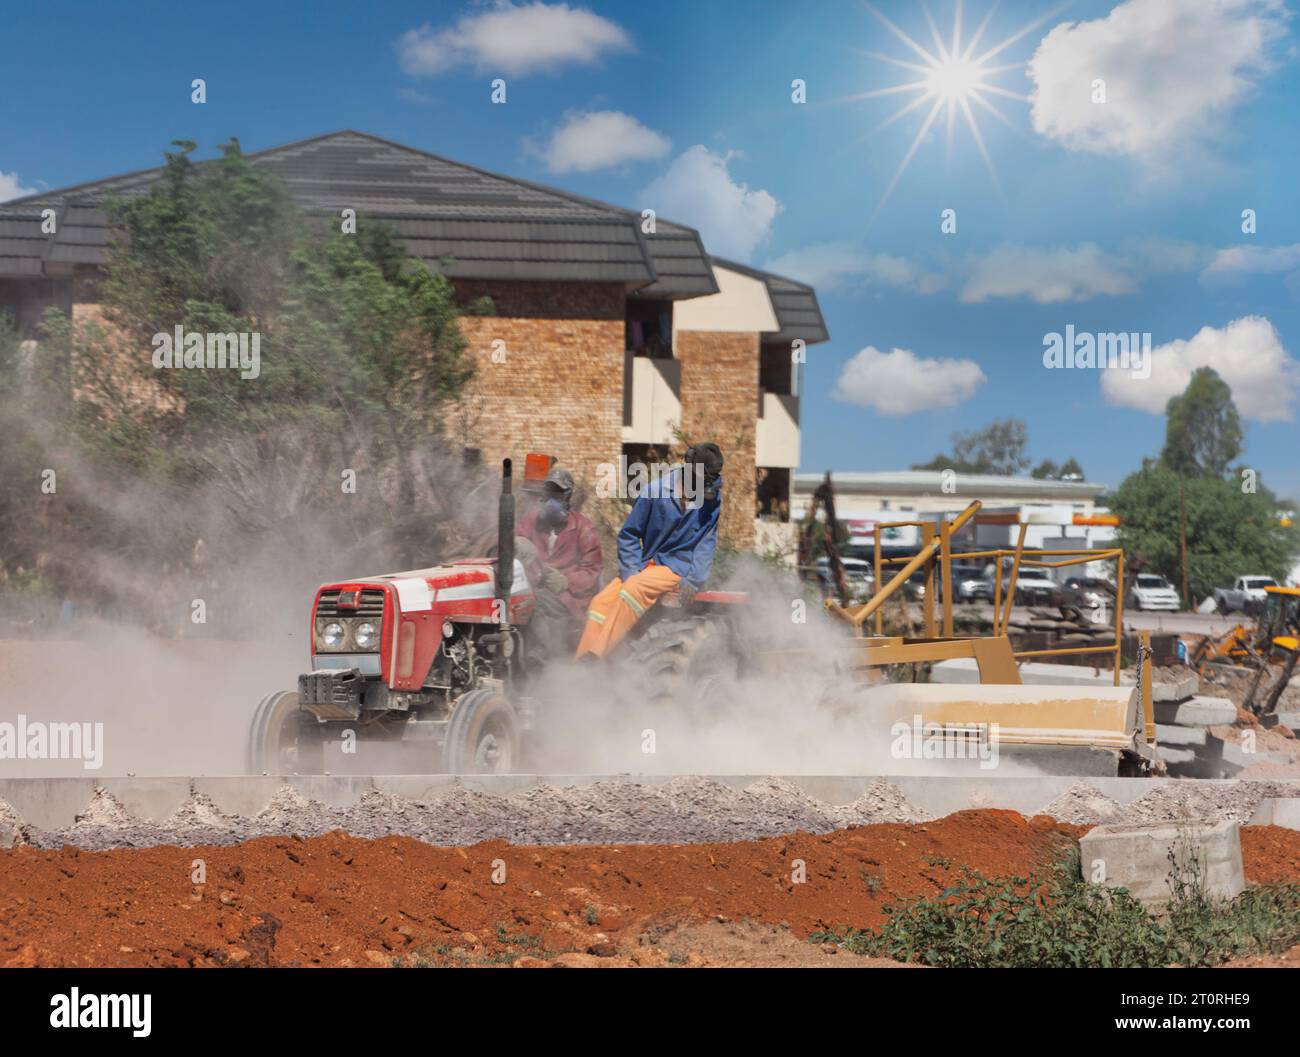 two african men on a tractor pulling a plug on a construction site between buildings with flats Stock Photo